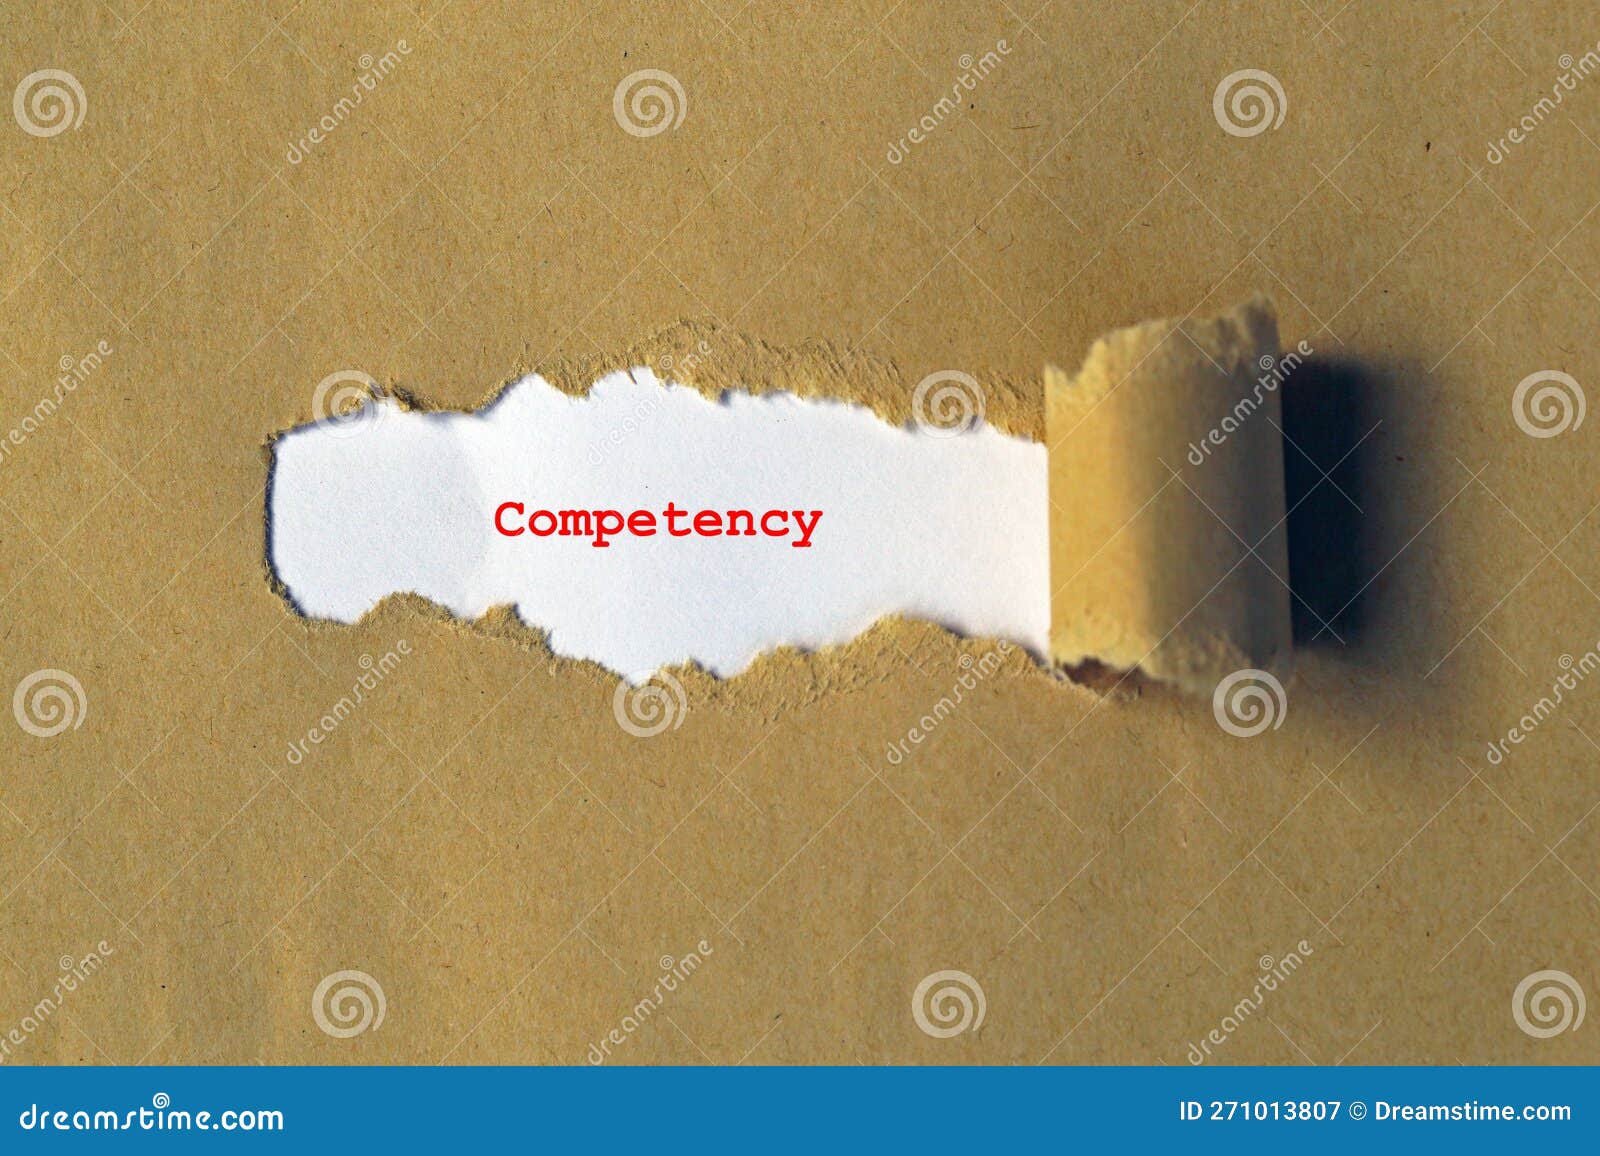 competency word on paper